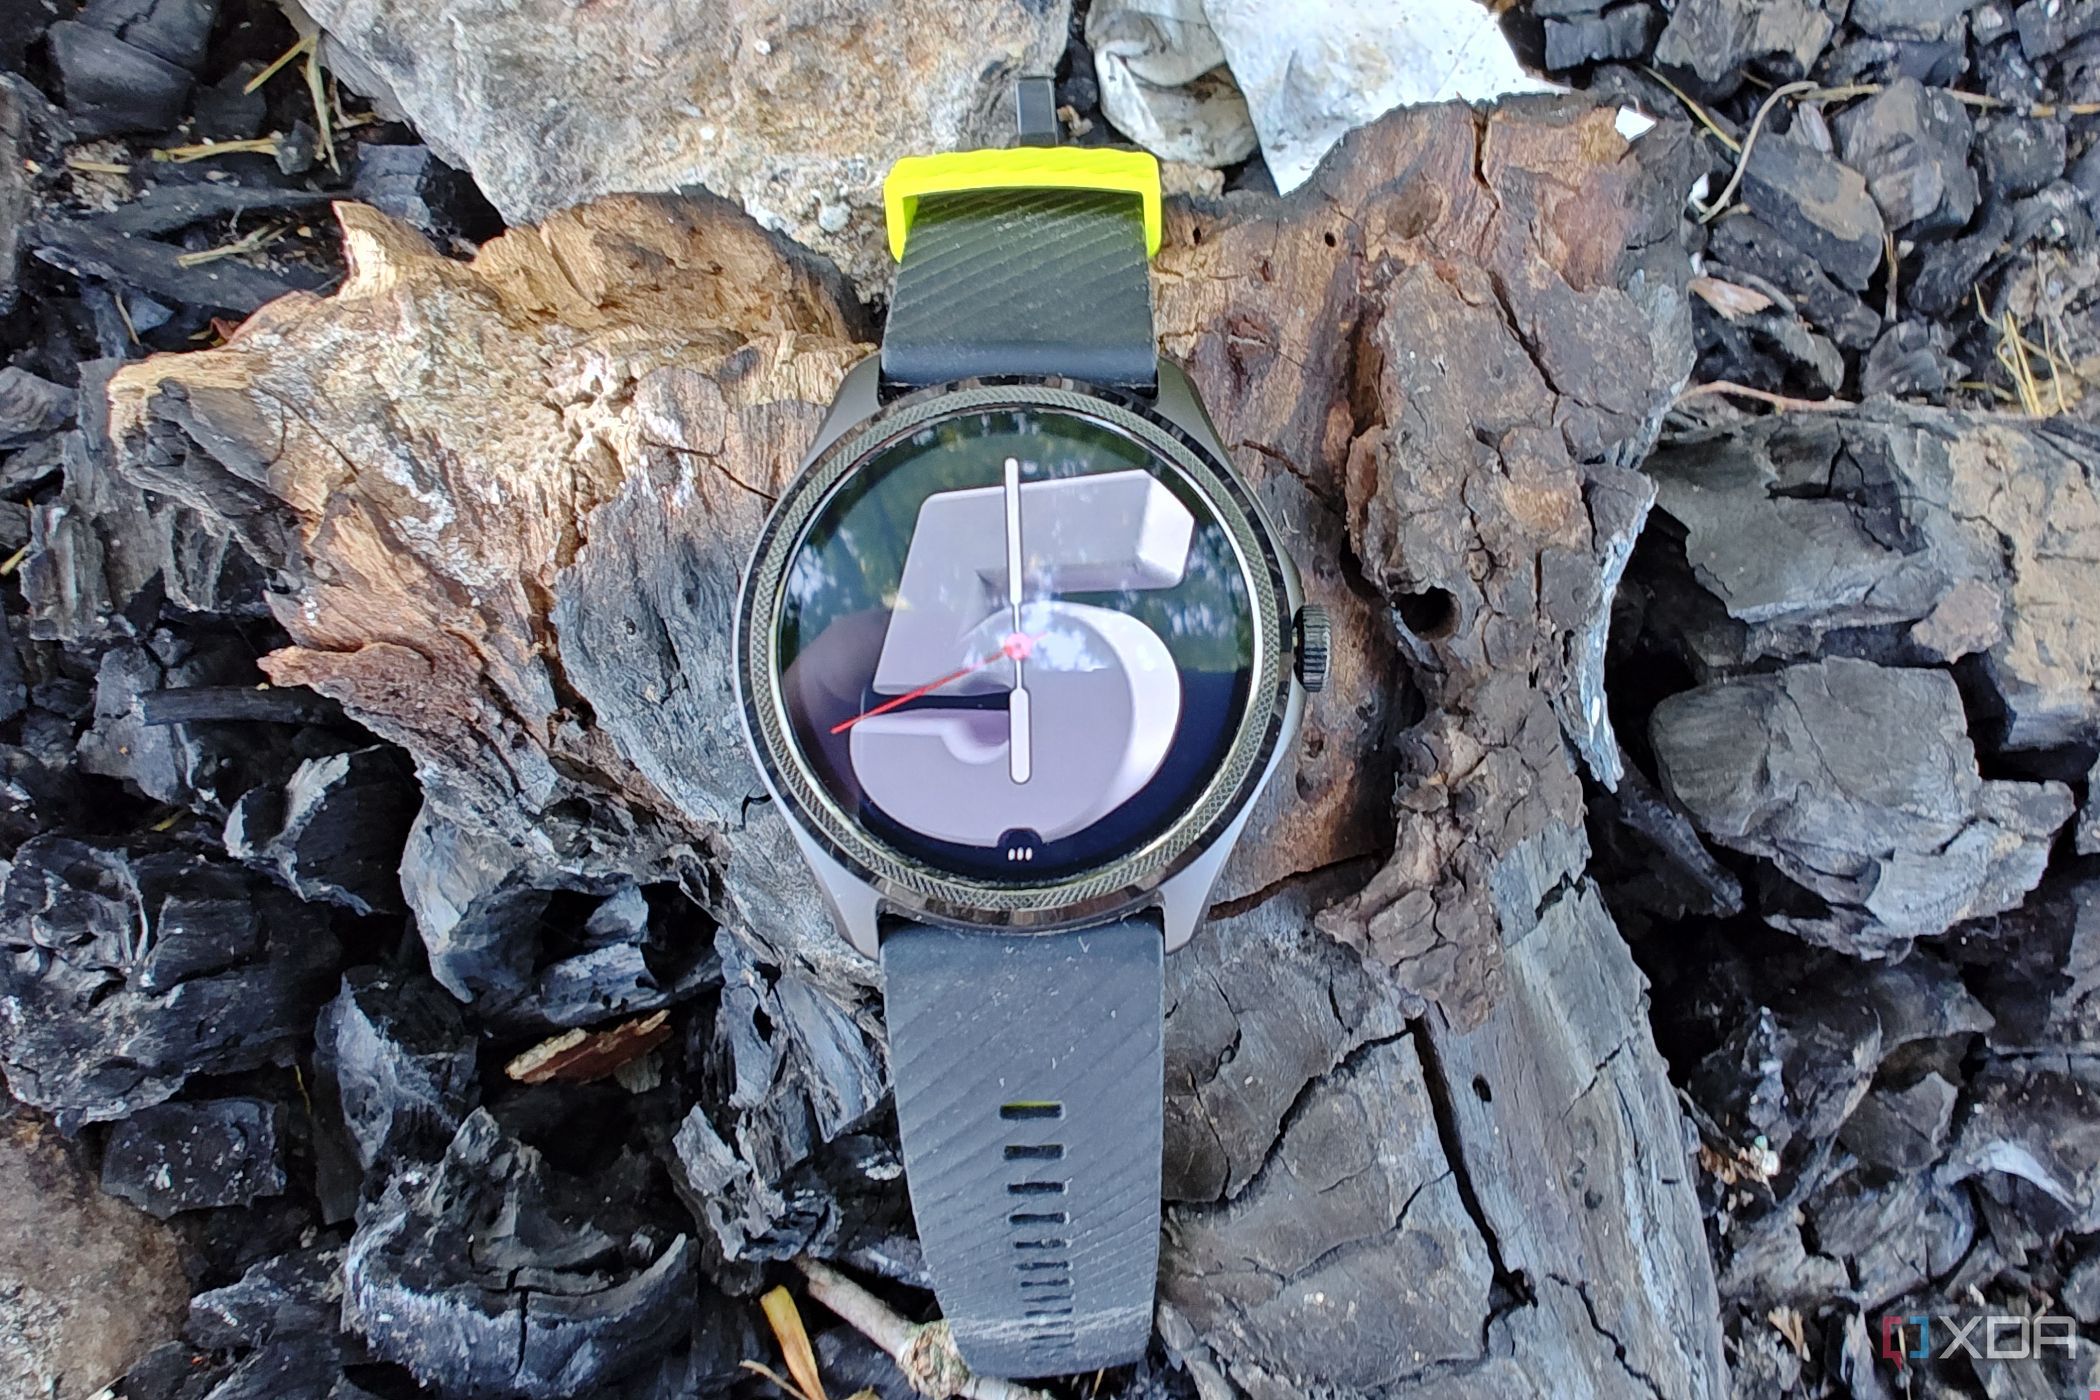 TicWatch Pro 5 with 1.43″ AMOLED display, Snapdragon W5+ Gen 1, Wear OS  announced